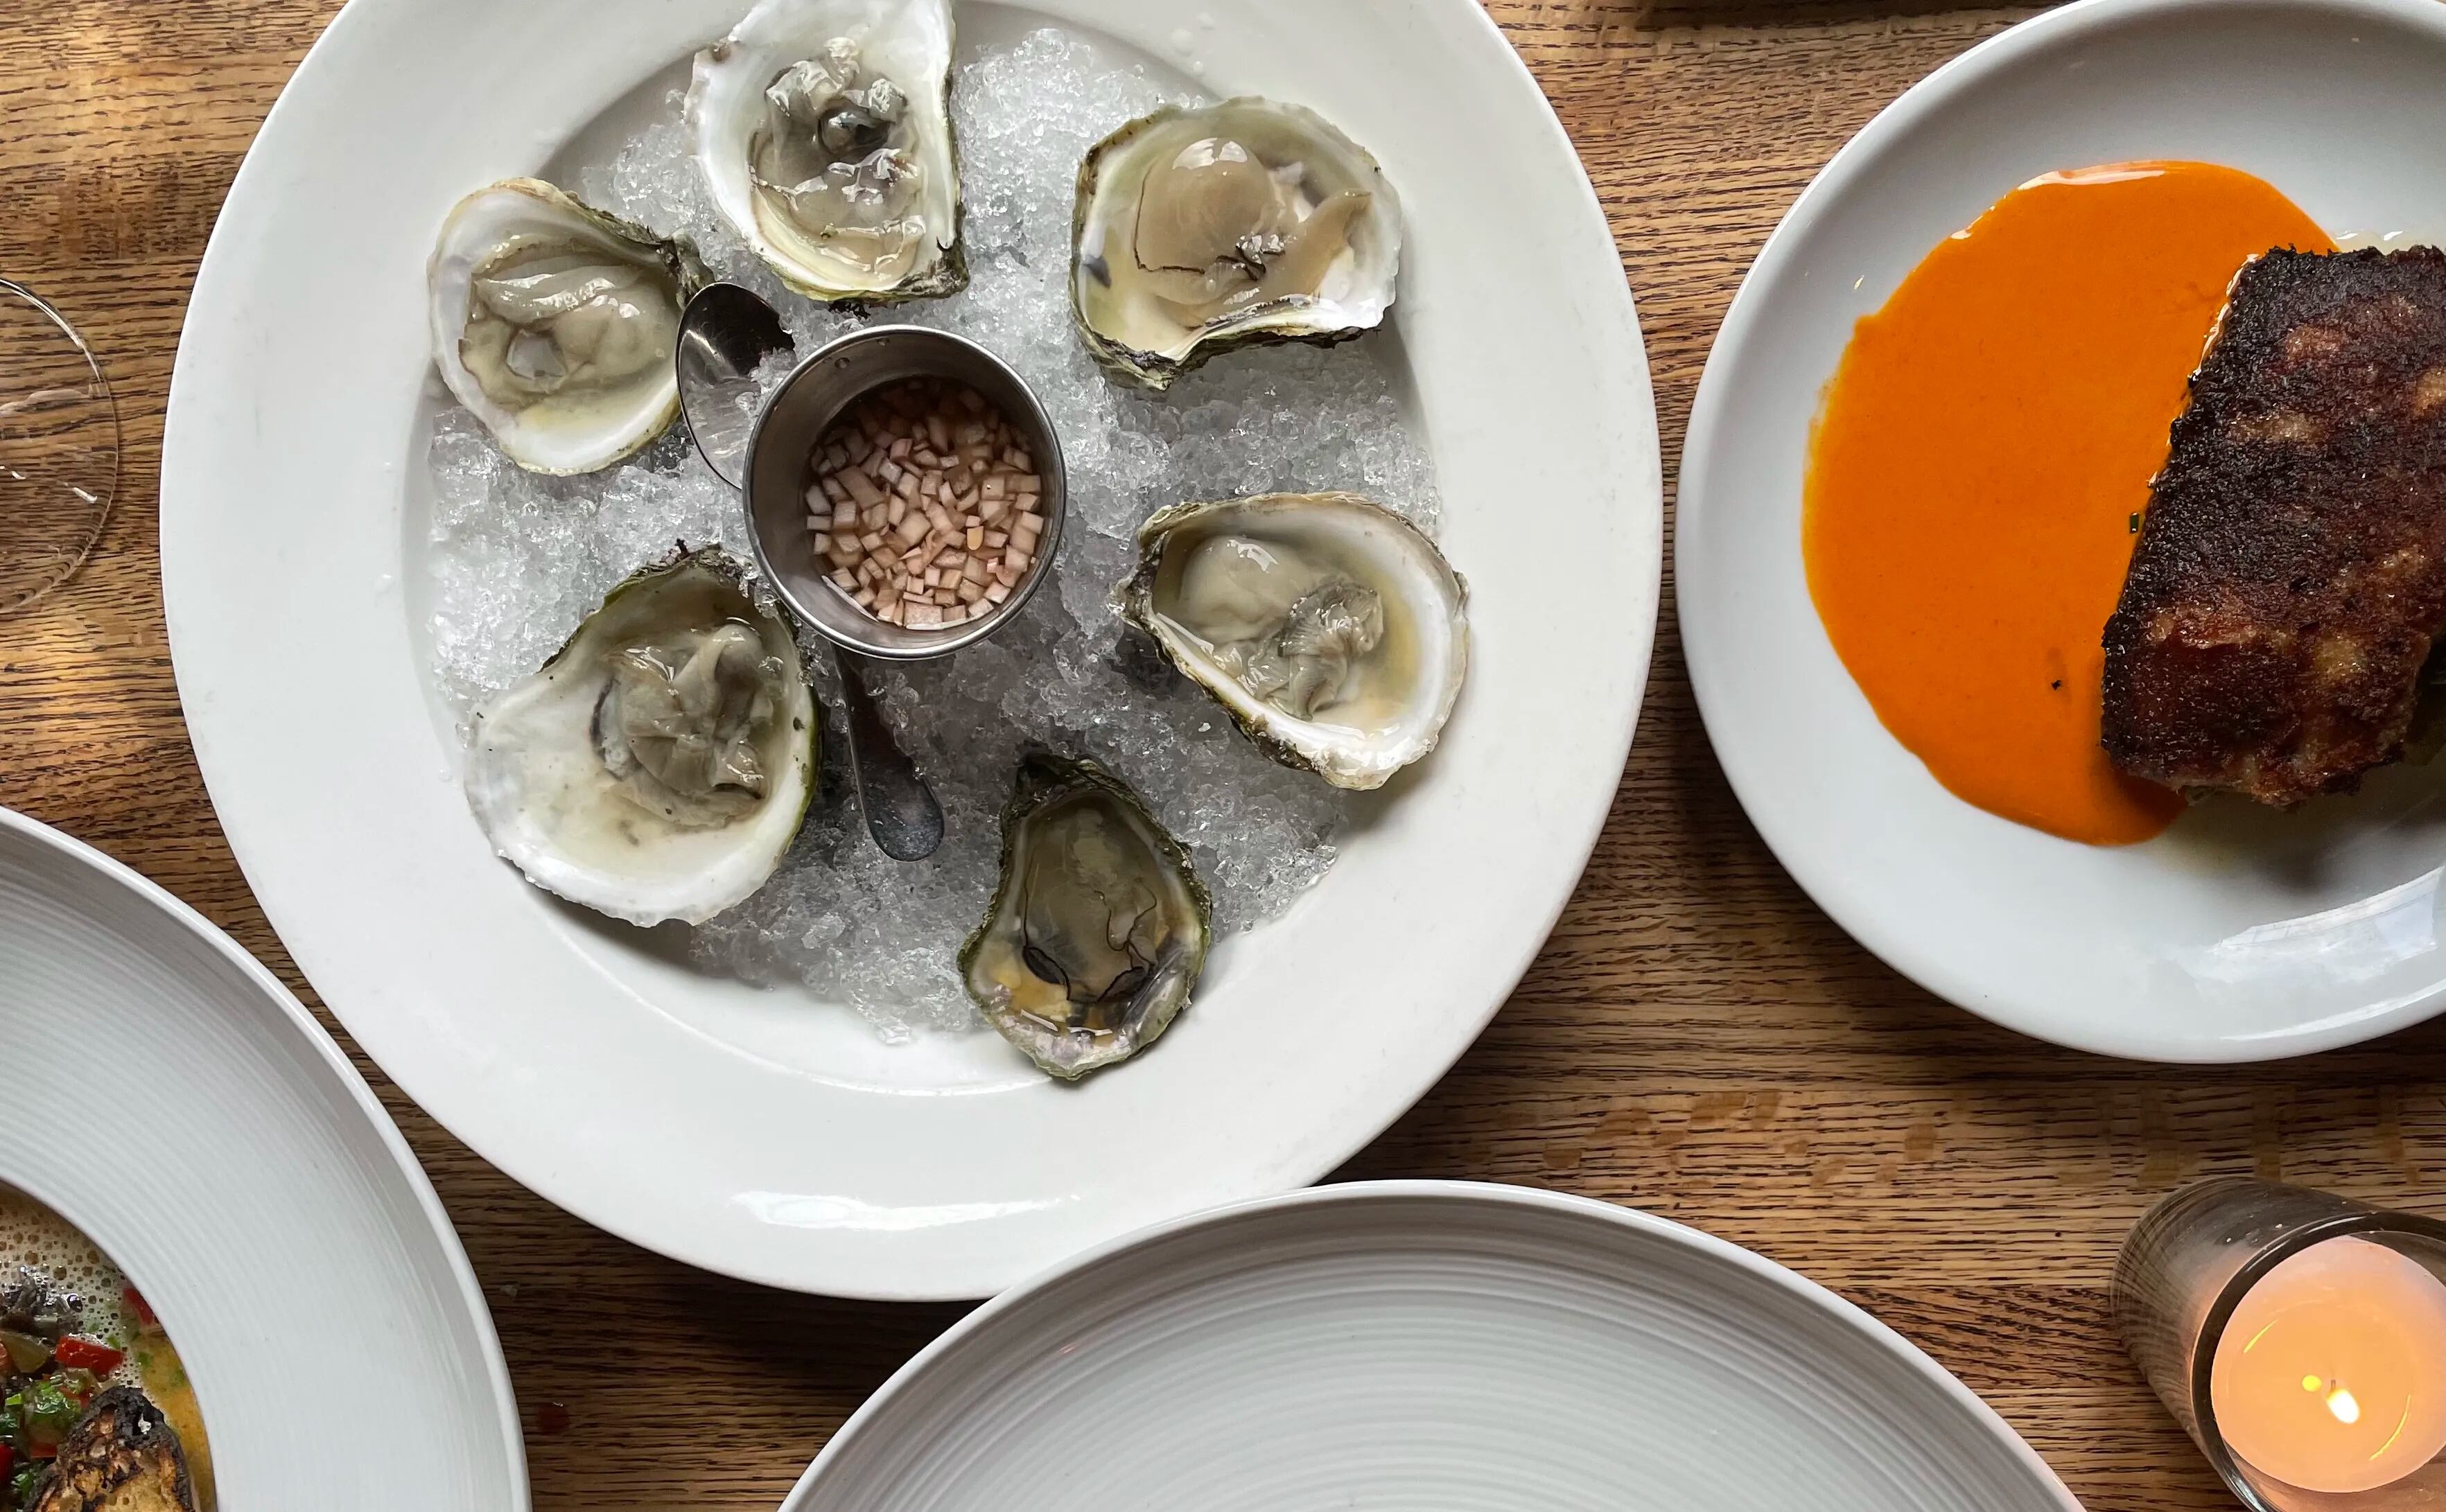 How to shuck oysters at home